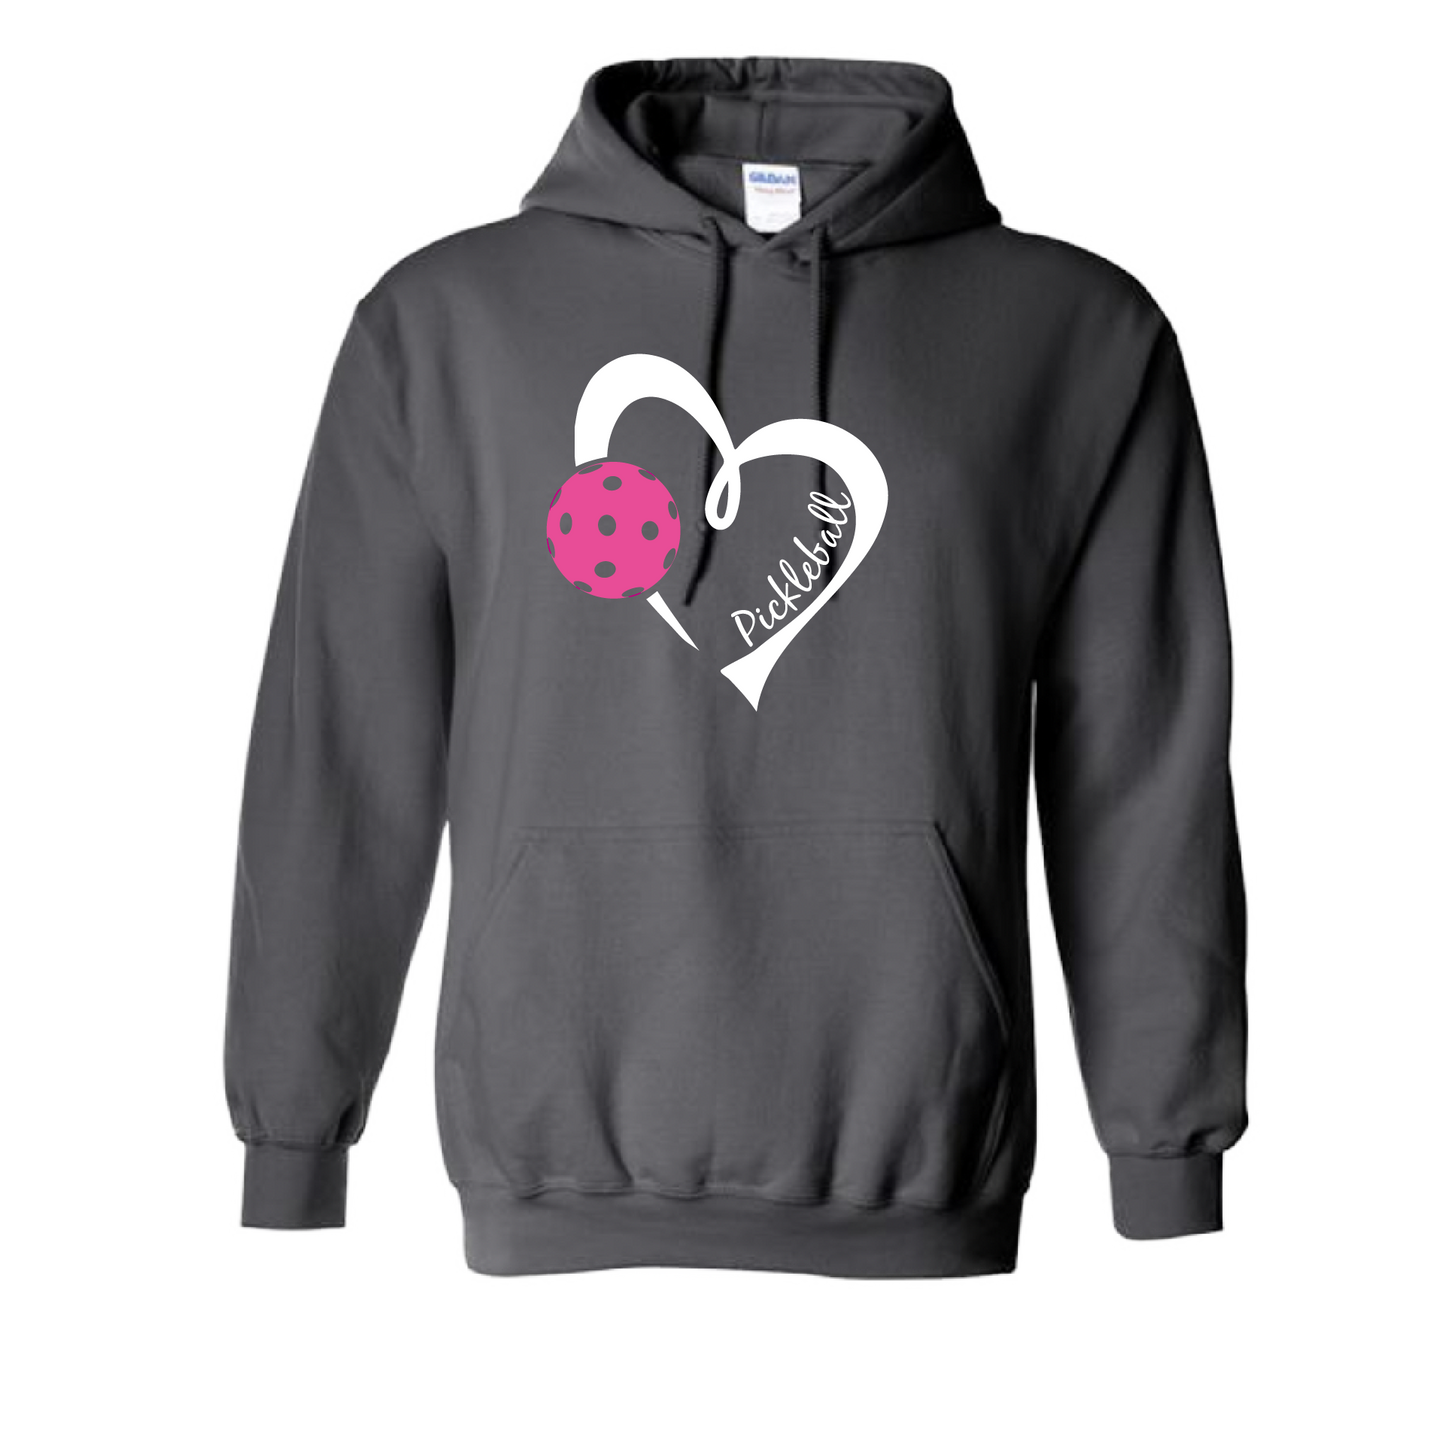 Pickleball Design: Heart with Pickleball  Unisex Hooded Sweatshirt: Moisture-wicking, double-lined hood, front pouch pocket.  This unisex hooded sweatshirt is ultra comfortable and soft. Stay warm on the Pickleball courts while being that hit with this one of kind design.